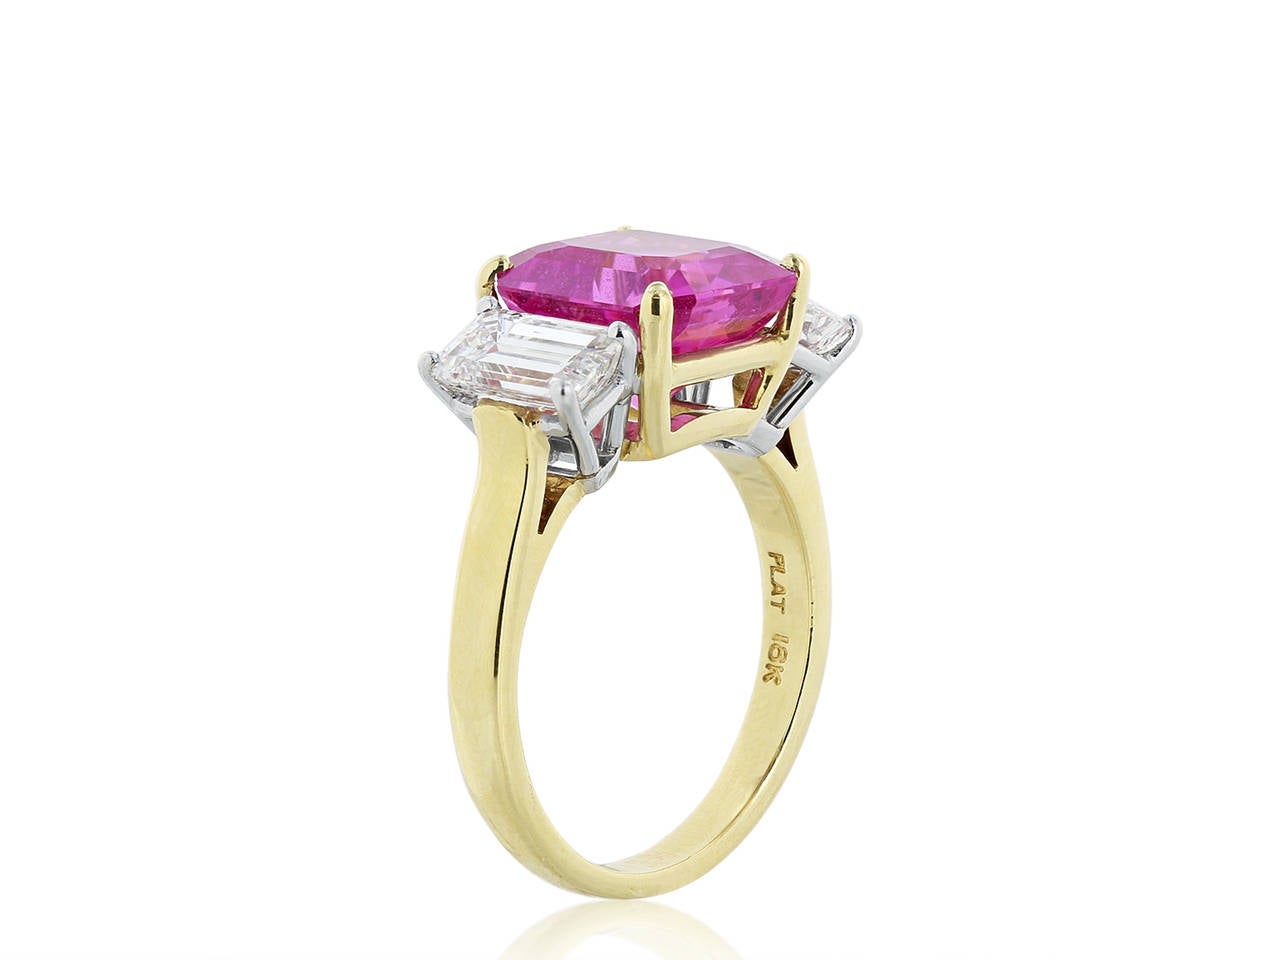 18 karat yellow gold and platinum three stone ring consisting of one radiant cut No Heat pink sapphire, weighing 6.13 carats with GIA report number 1162715810, flanked by 2 emerald cut diamonds having a total weight of 2.06 carats, one weighing 1.01